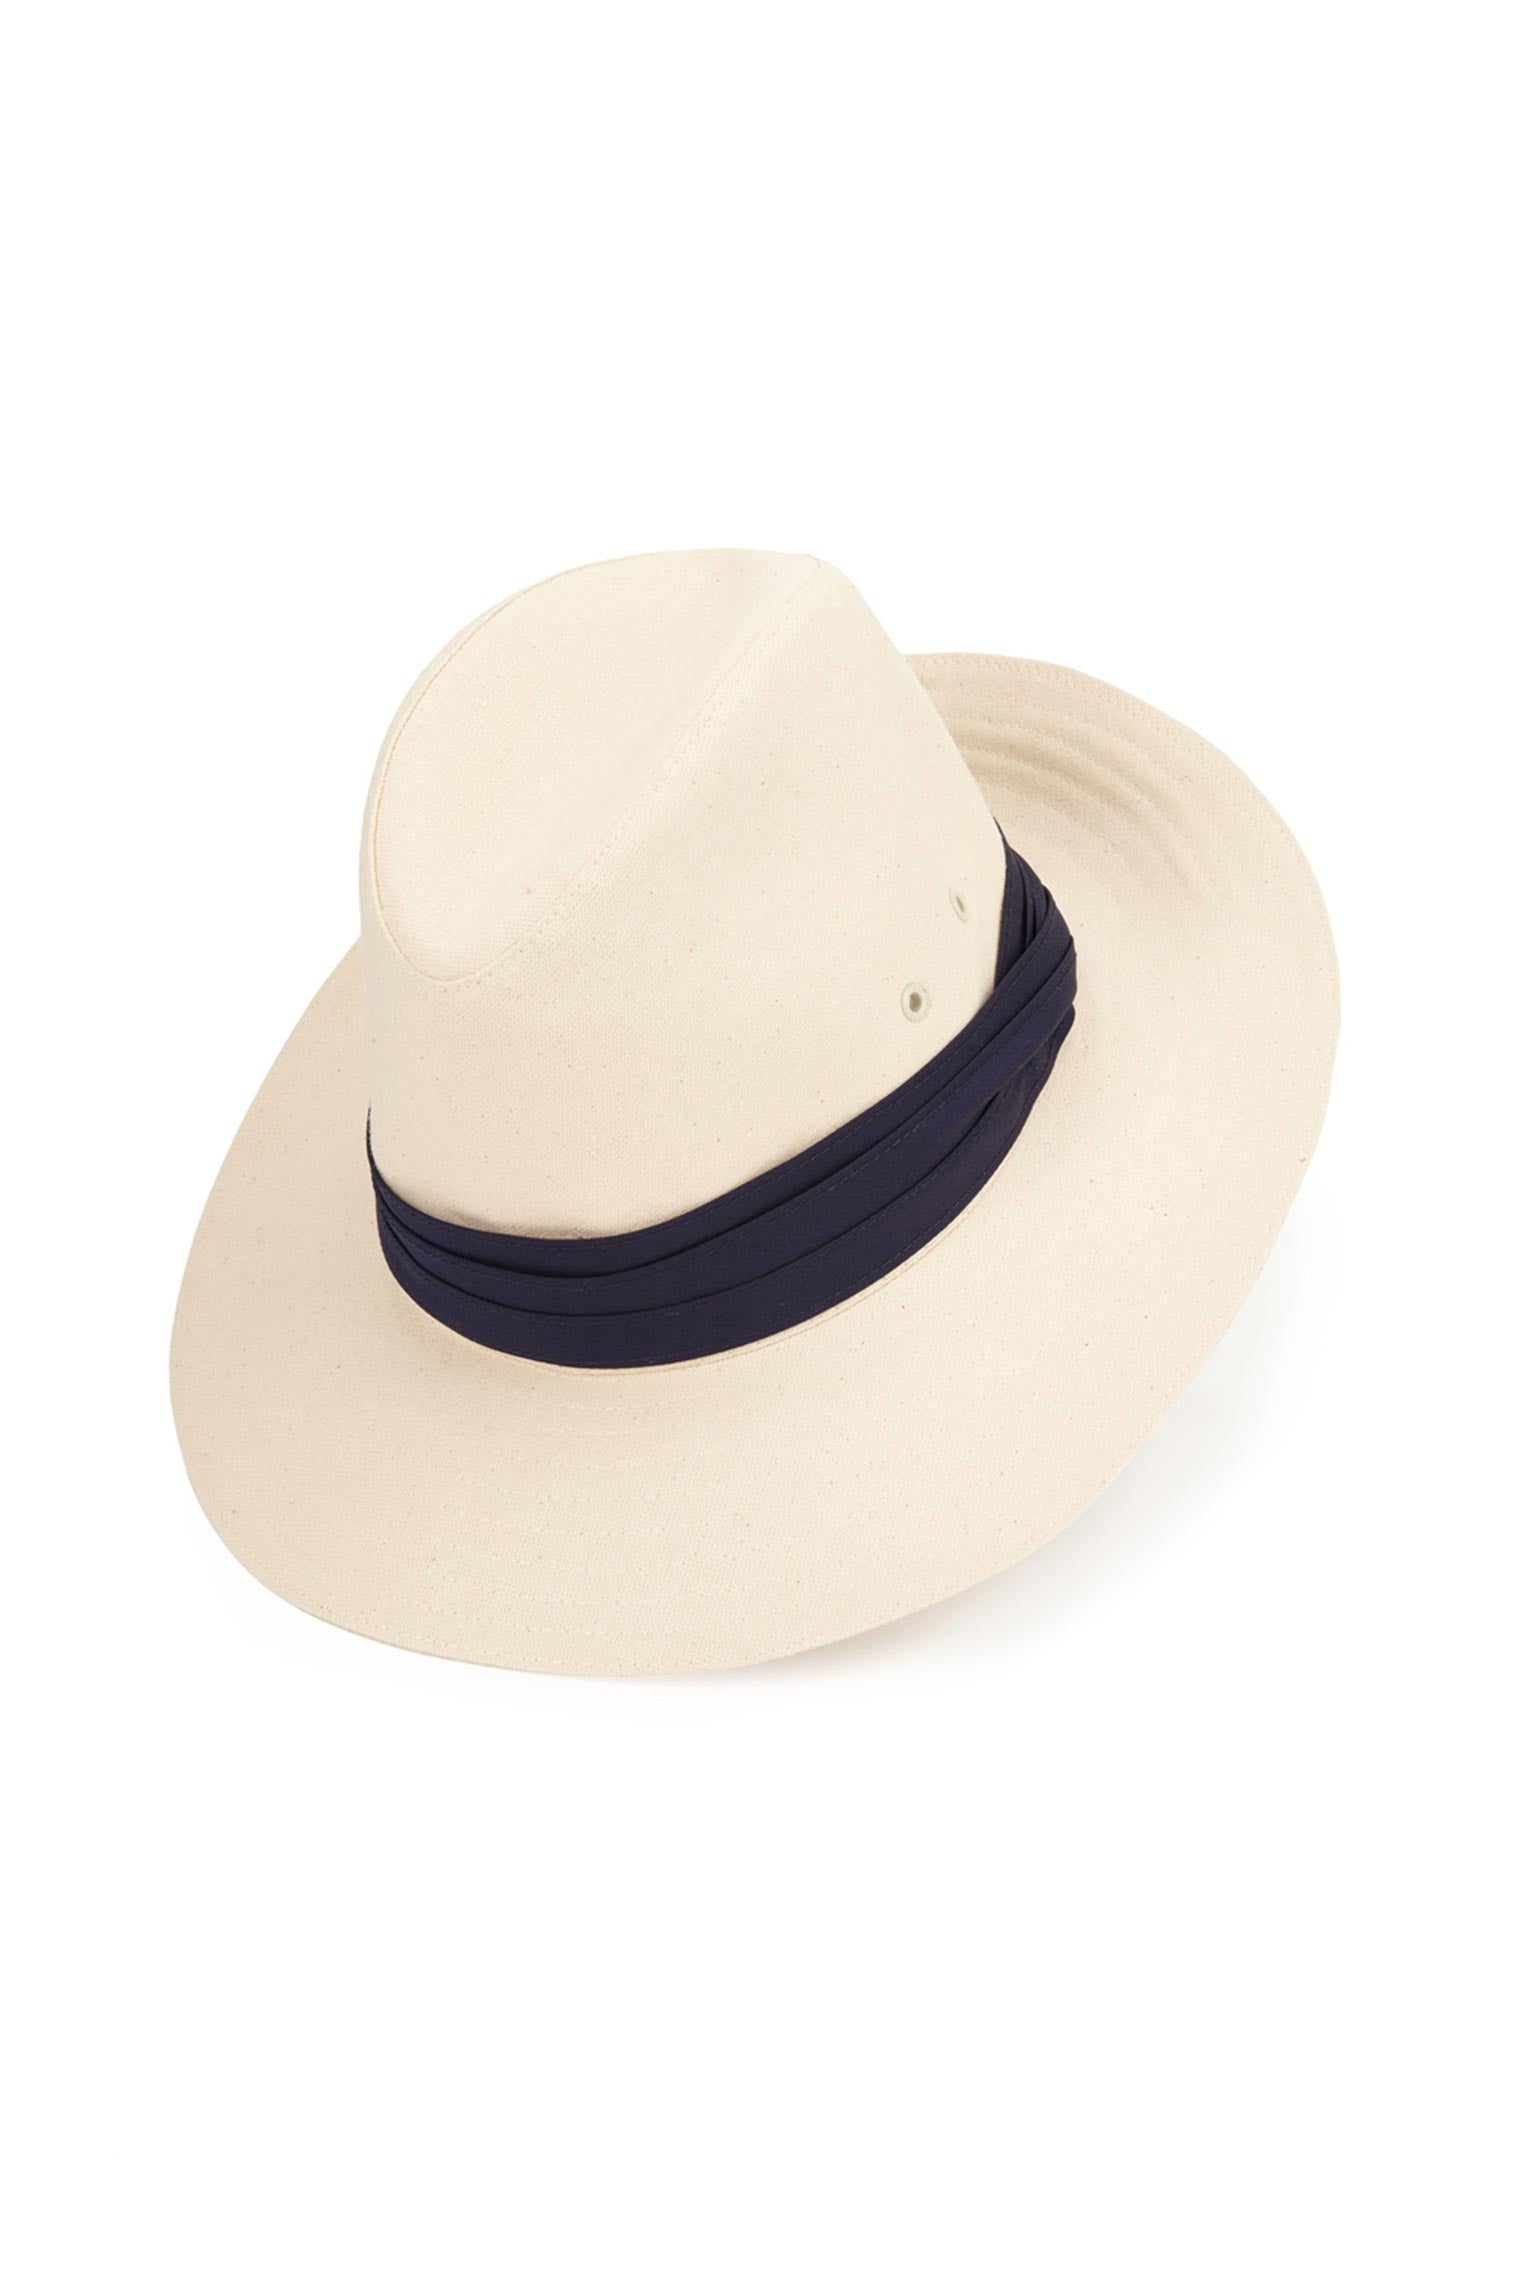 Namibia Calico Fedora - Hats for Long Face Shapes - Lock & Co. Hatters London UK